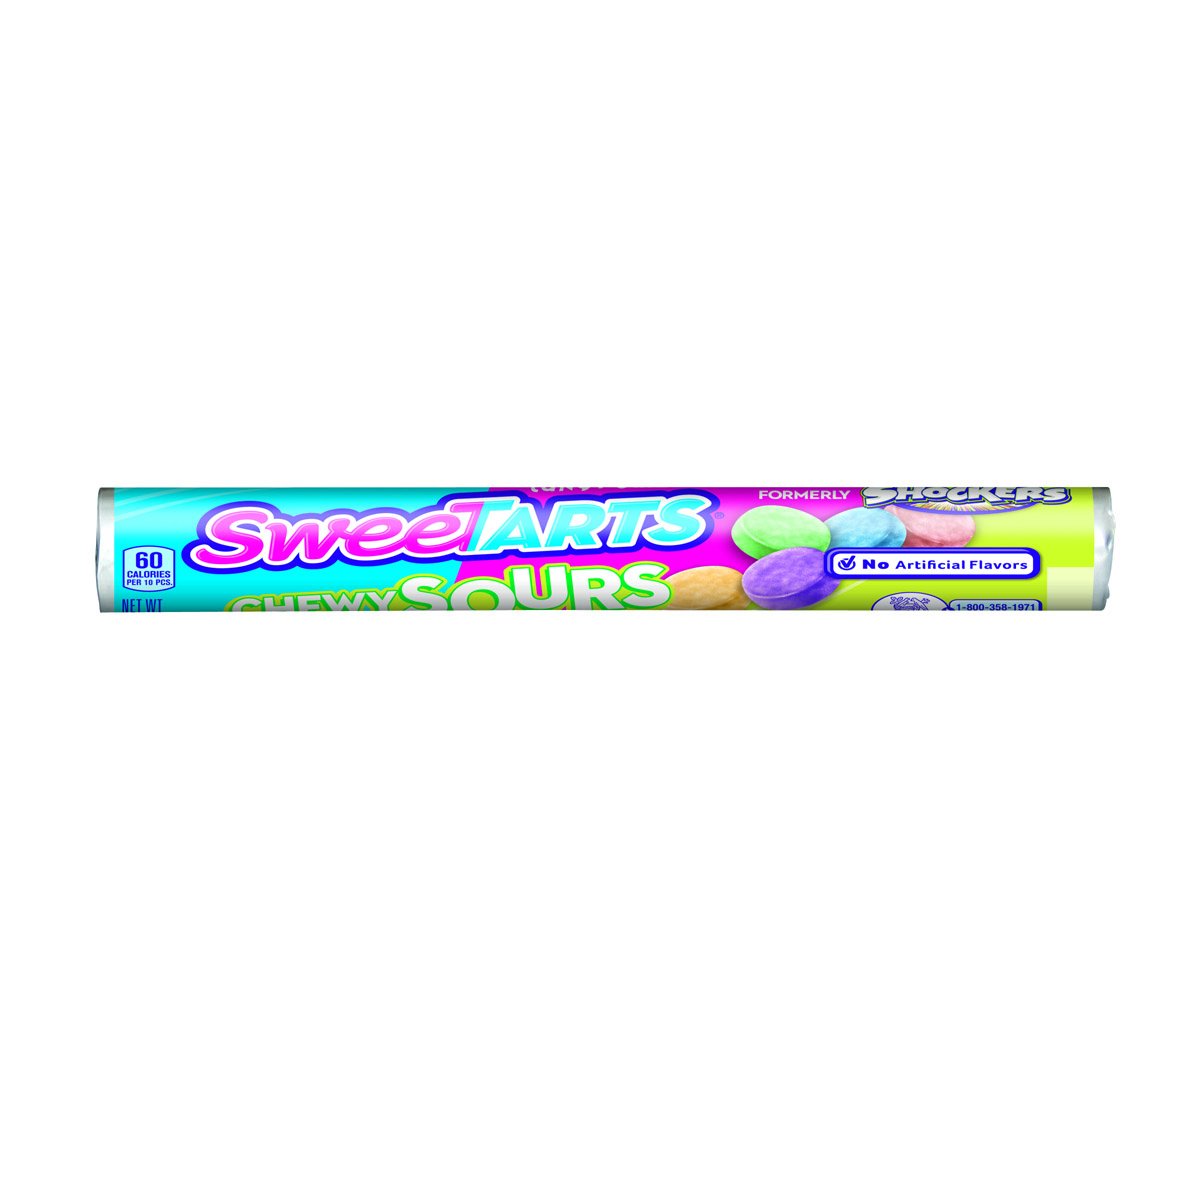 Sweetarts Chewy Sours Roll